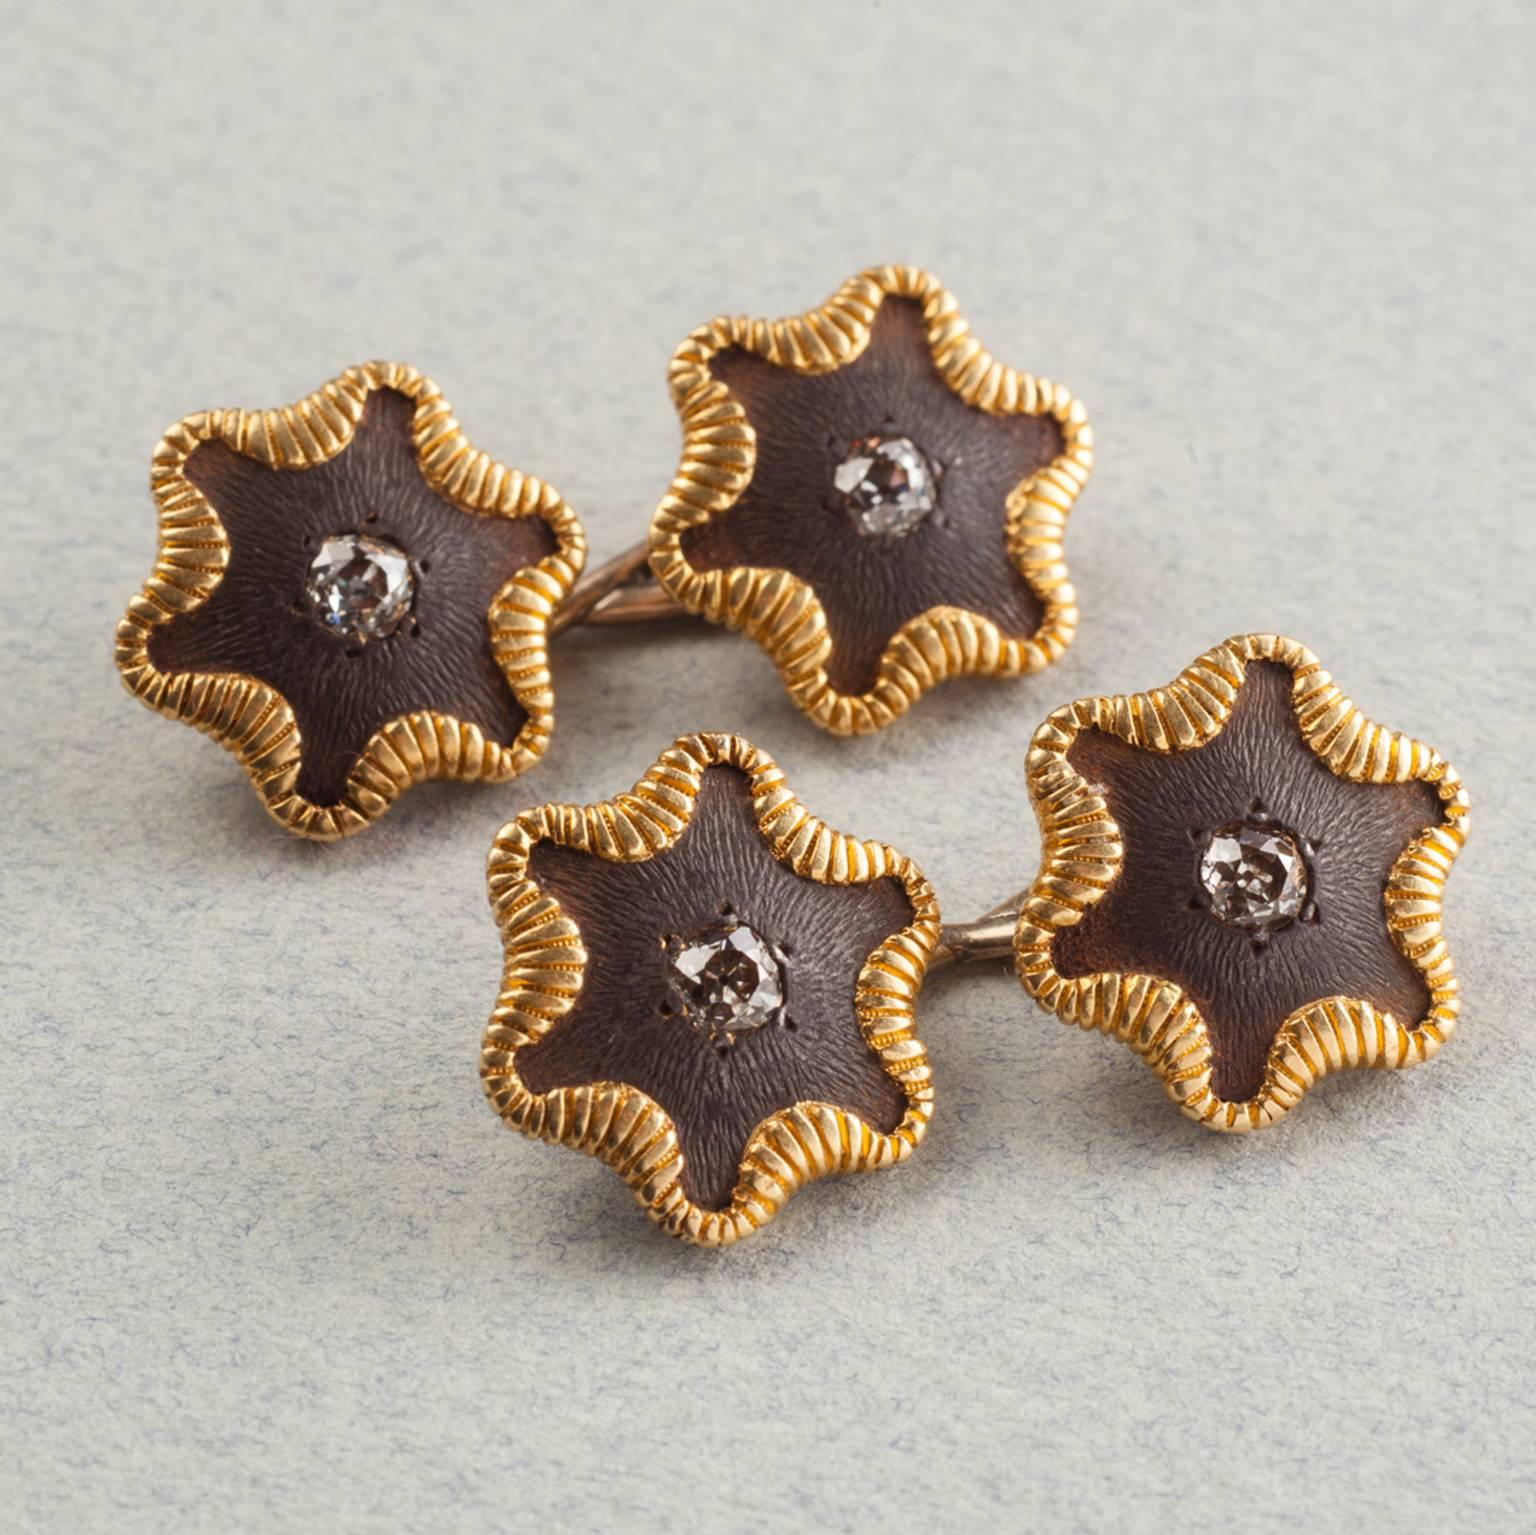 A pair of important 18 carat gold, steel and old cut diamond cufflinks, signed: Tiffany & Co., circa 1880.

Illustrated in the book: 'Cufflinks' by Susan Jonas and Marilyn Nissenson, page: 27.